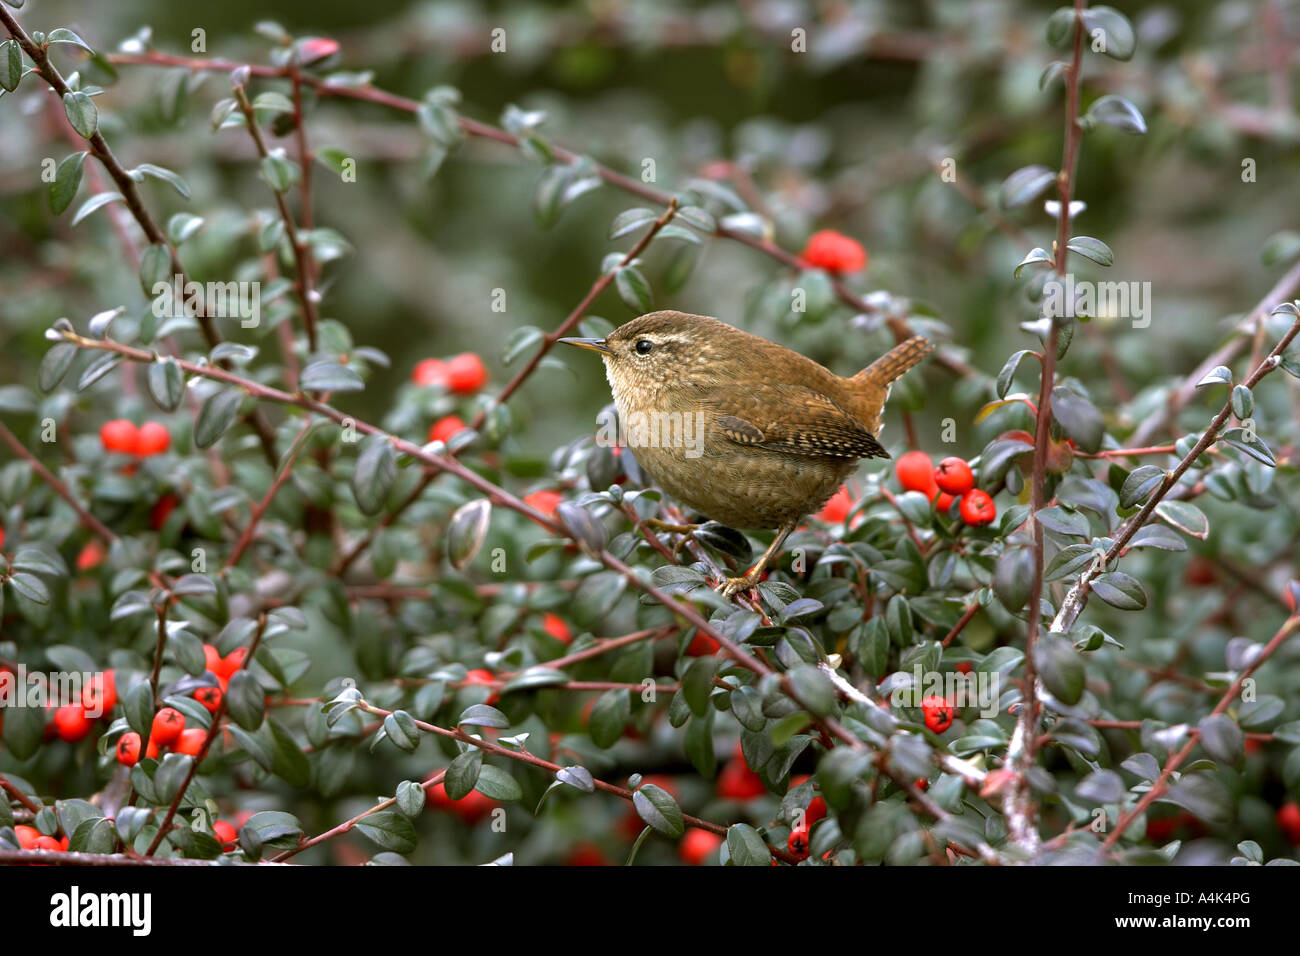 Winter Wren Troglodytes troglodytes adult perched in a Cotoneaster bush with red berries, Todwick, South Yorkshire, England Stock Photo